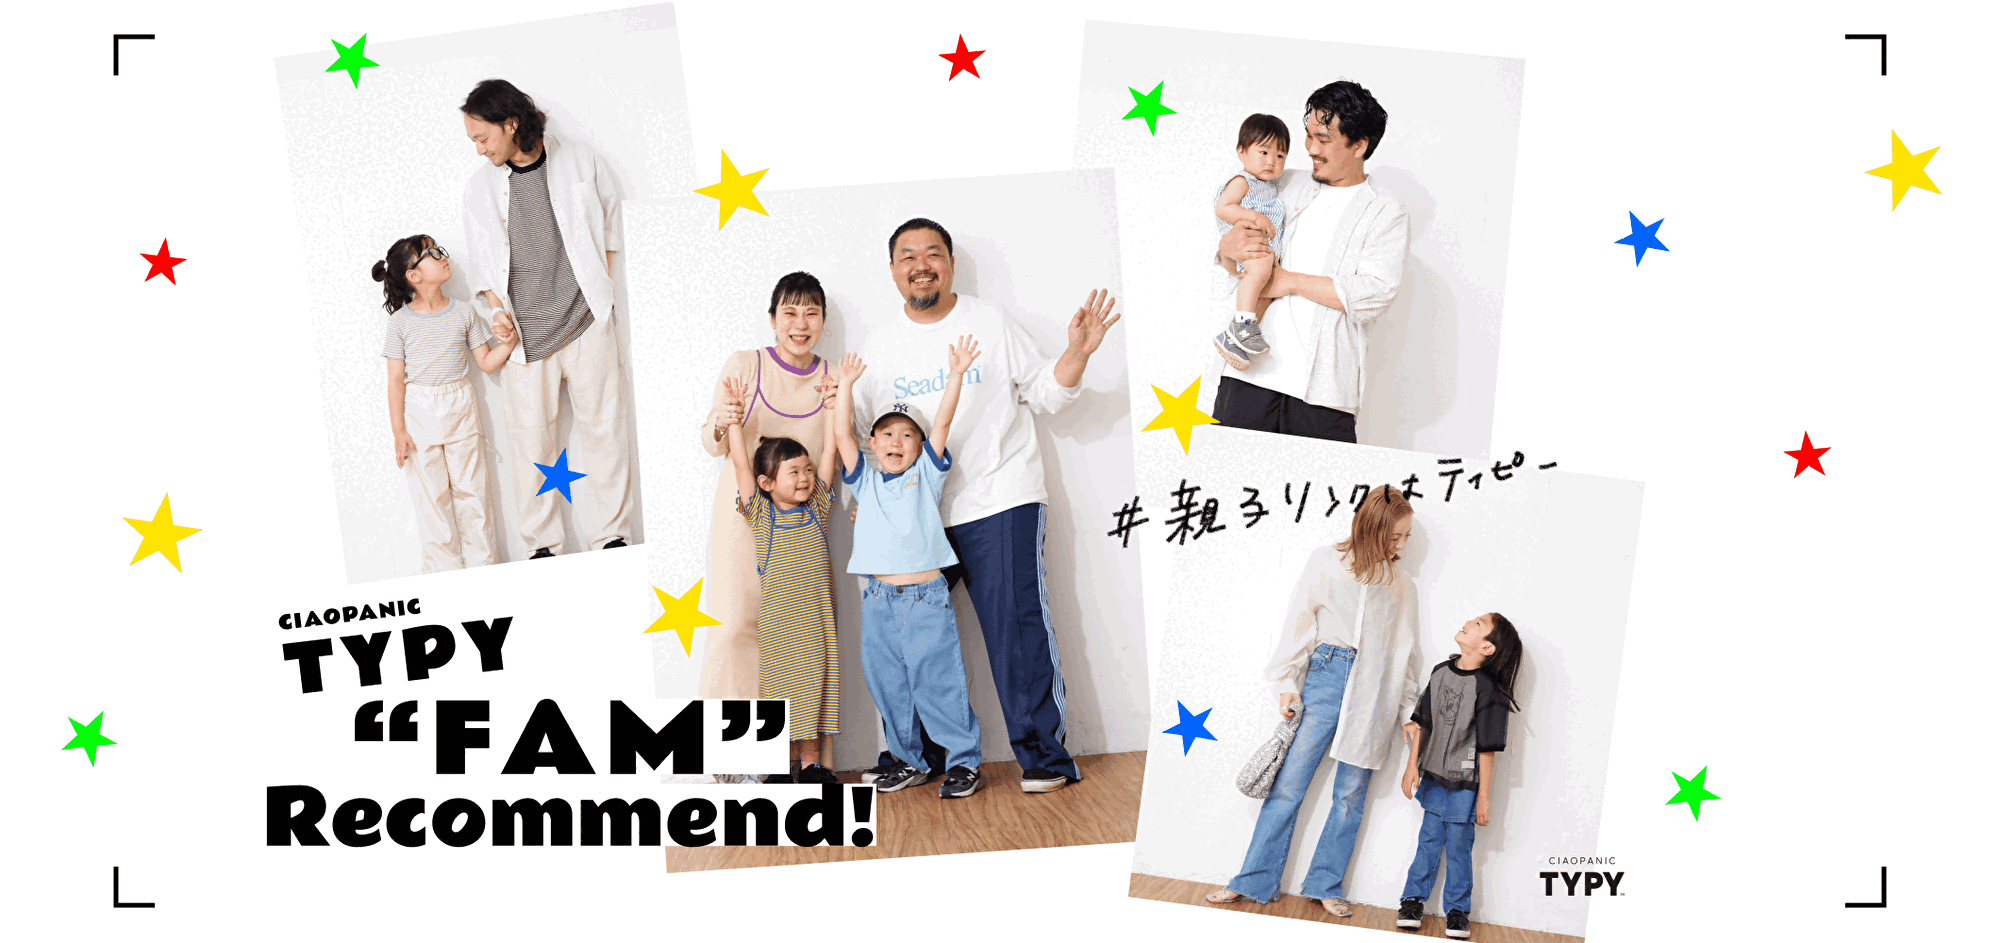 ＼ TYPY FAM RECOMMEND！ ／